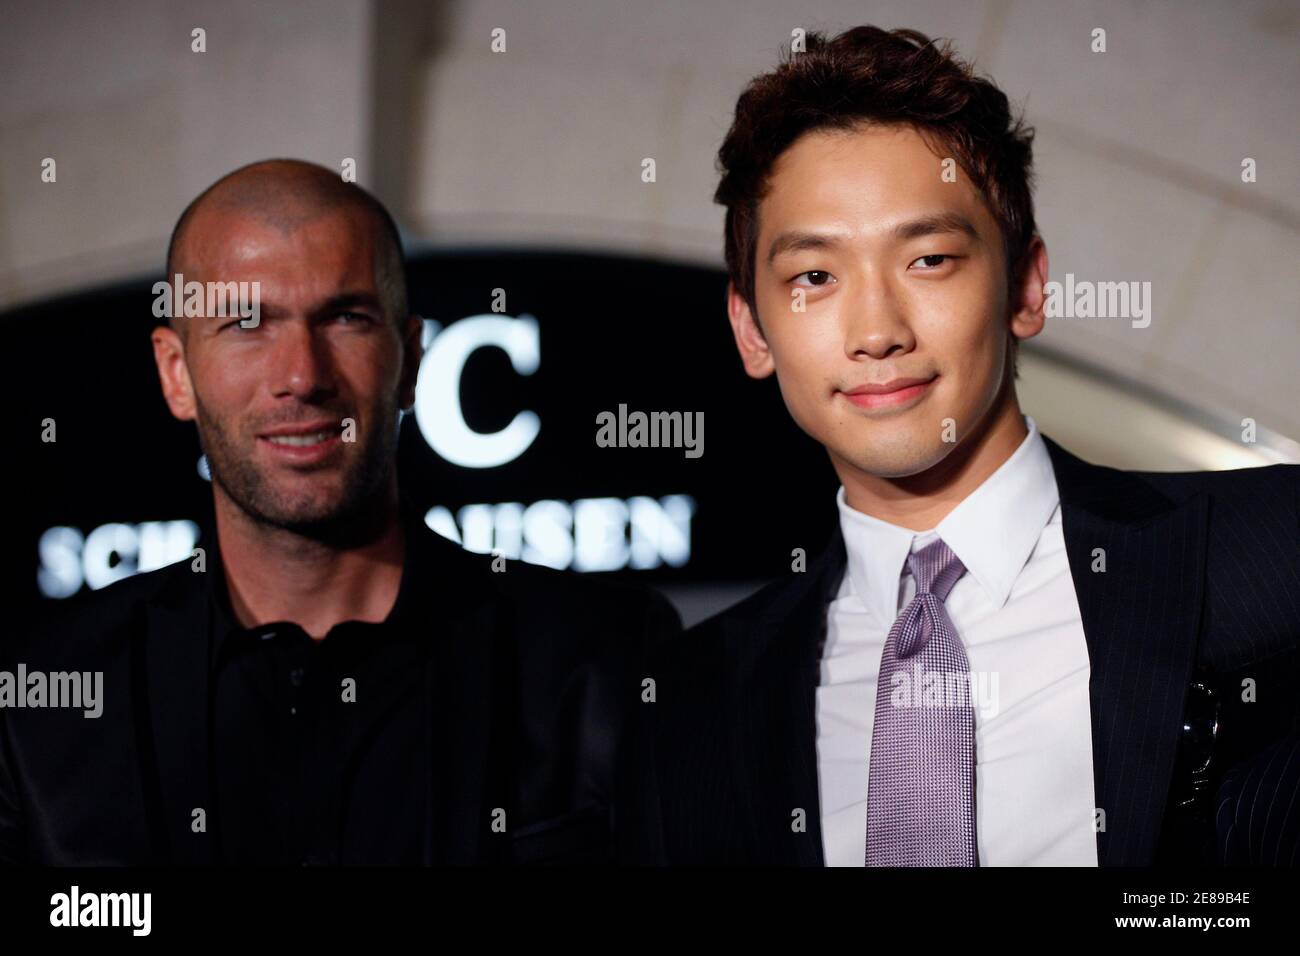 Former French national team soccer player Zinedine Zidane (L) and singer Rain from South Korea attend a promotional event at a watch shop in Hong Kong October 28, 2009.    REUTERS/Tyrone Siu     (CHINA ENTERTAINMENT SPORT SOCCER) Stock Photo